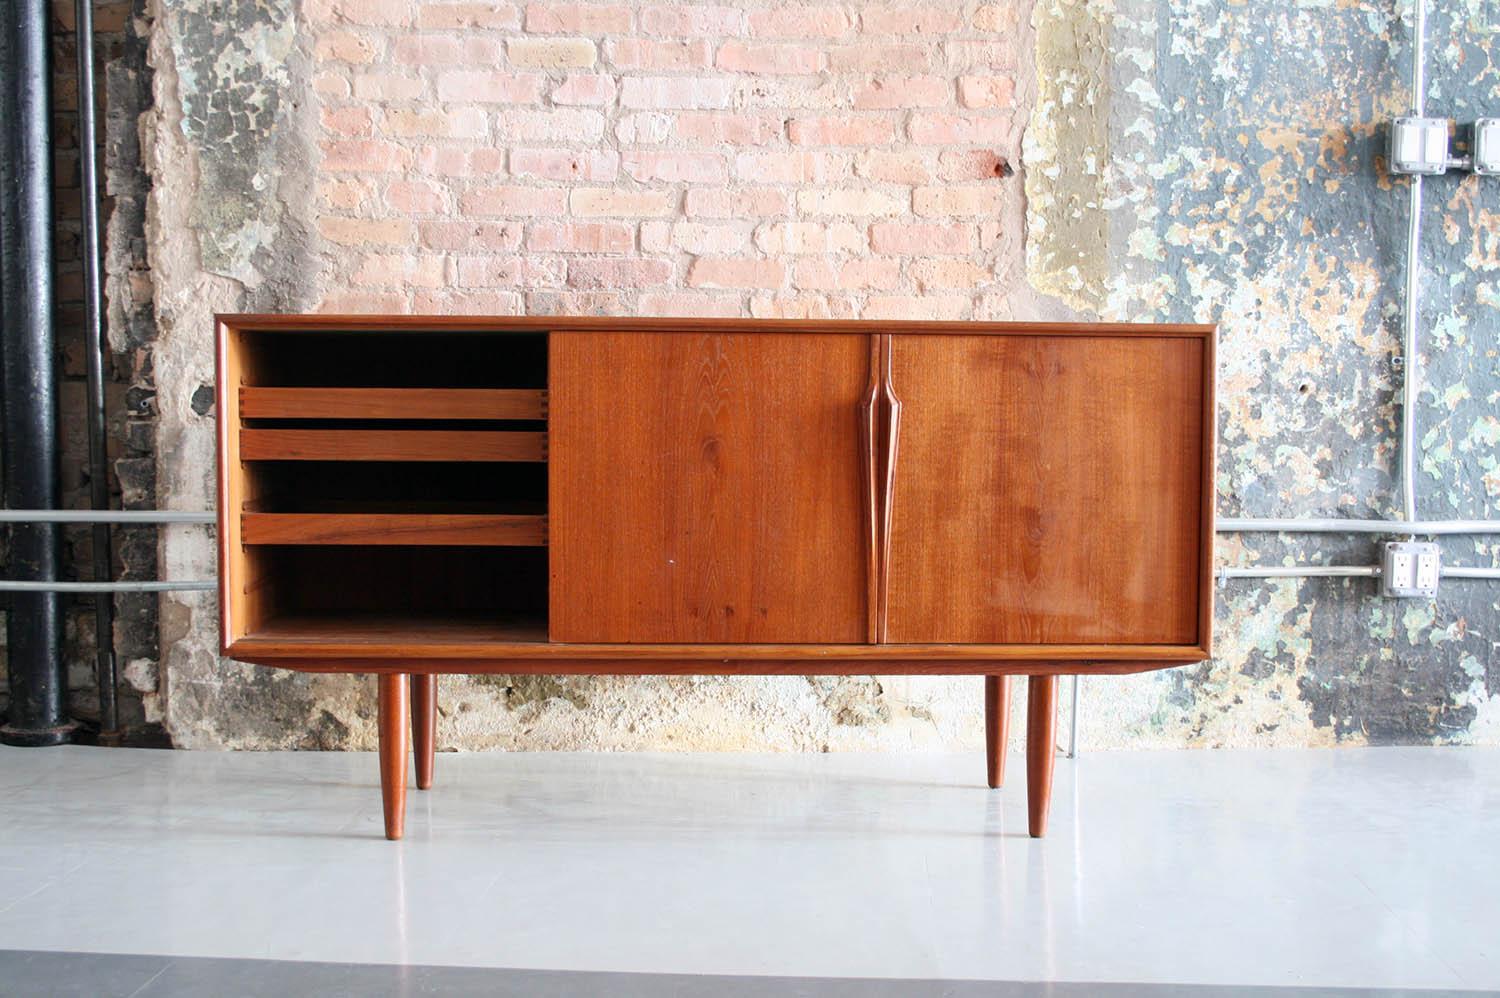 This vintage teak credenza combines Mid-Century Modern style with spacious storage options. Sliding doors hide shelves and feature elegantly carved wood handles.